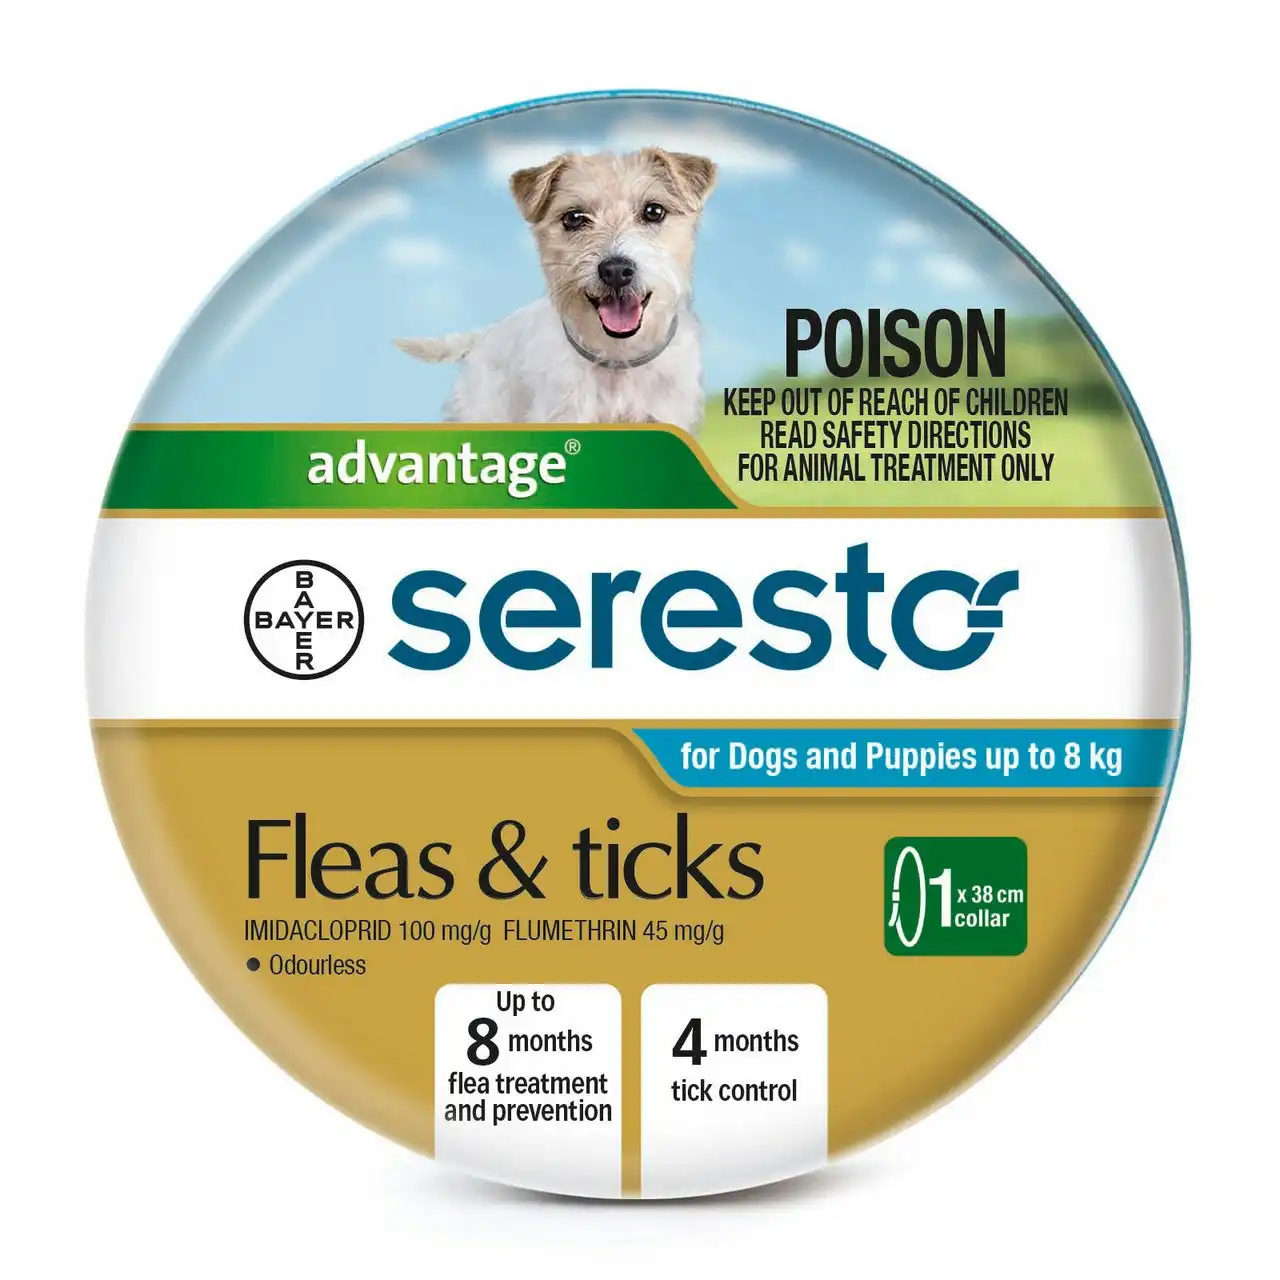 Seresto Flea & Tick Collar for Dogs And Puppies Up To 8kg - 1 Pack